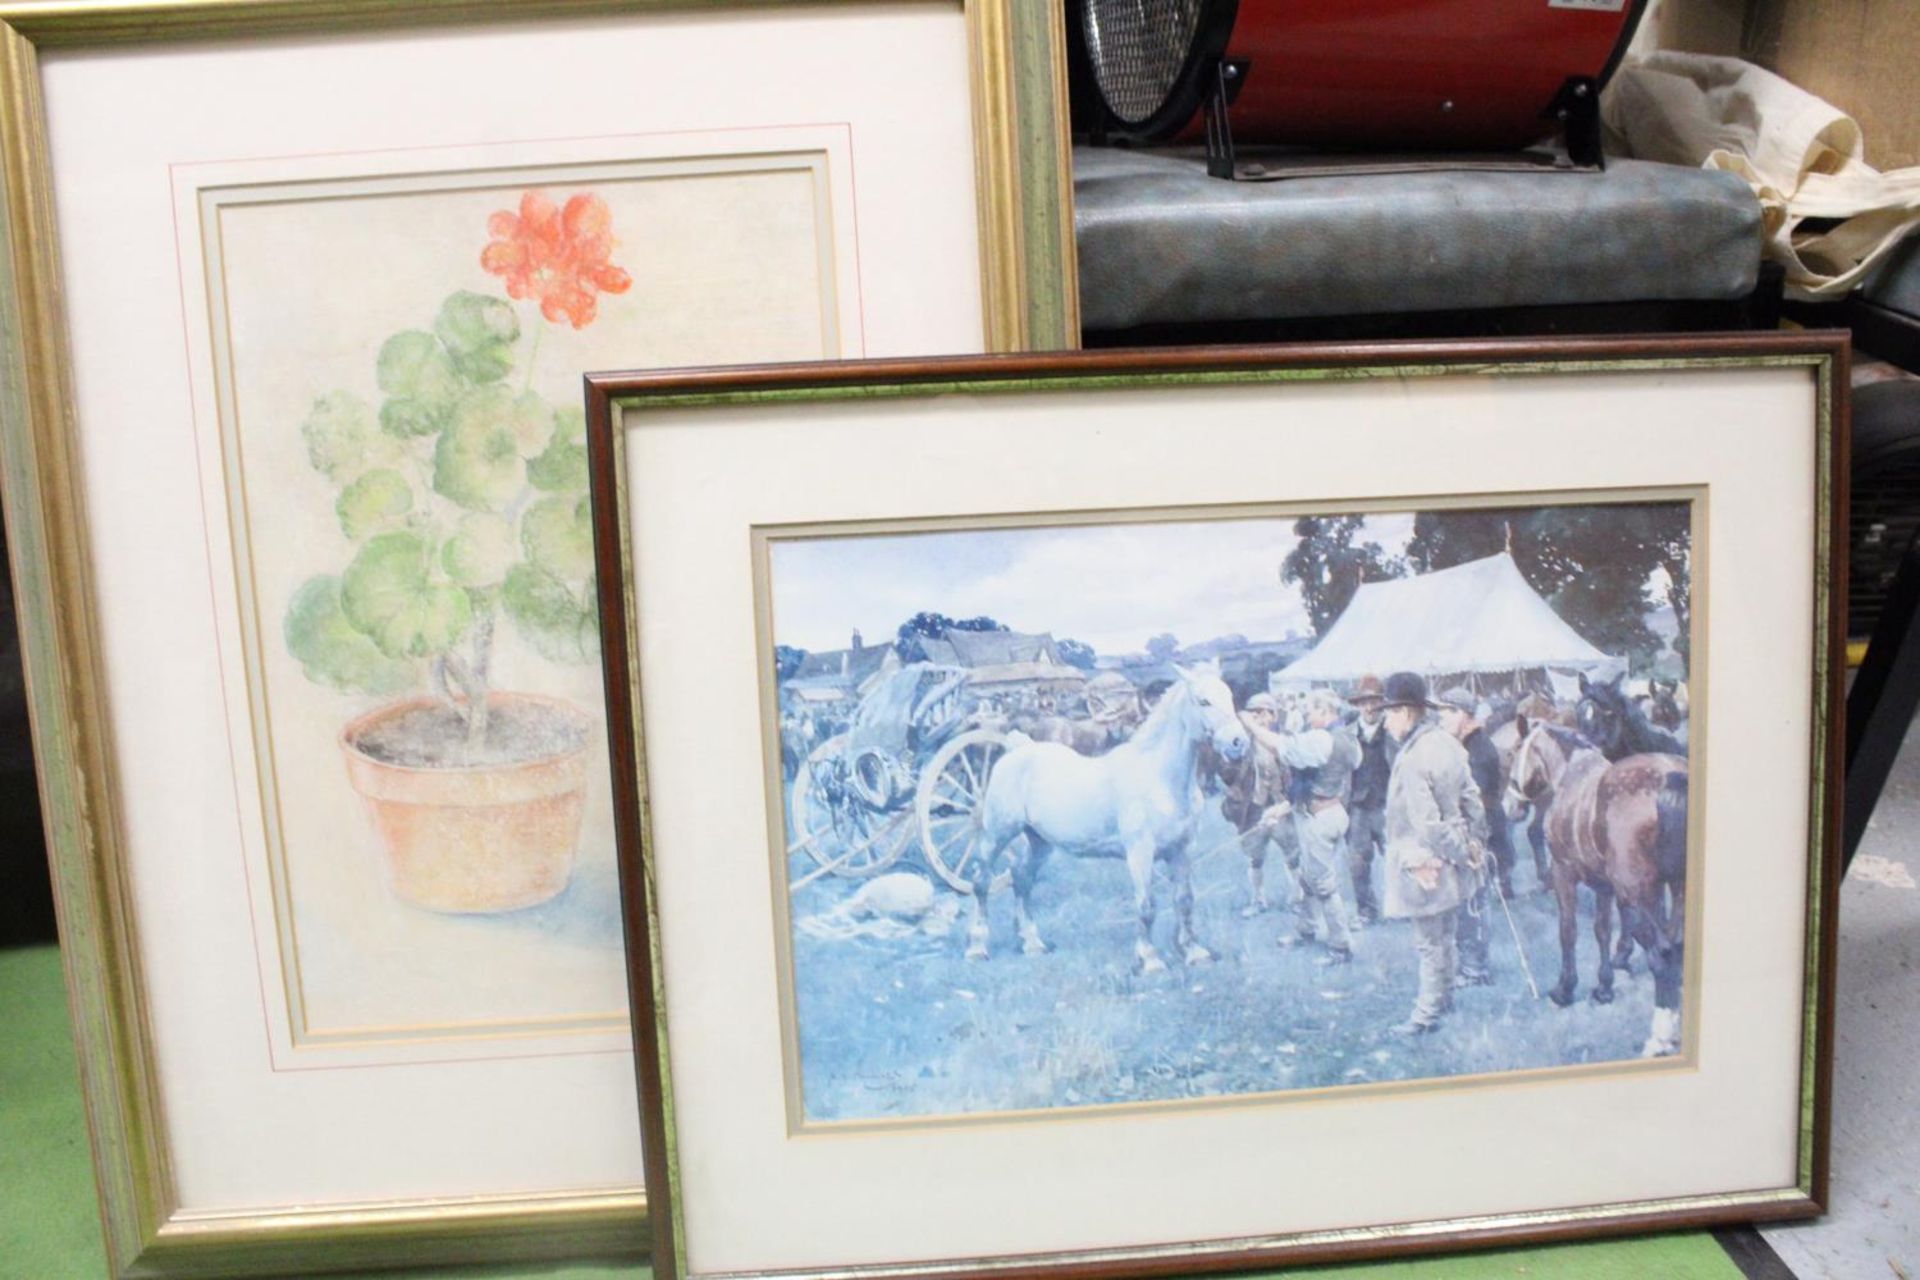 A MIXED MEDIA PICTURE OF A PLANT IN A POT, PLUS A PRINT OF A HORSE FAIR